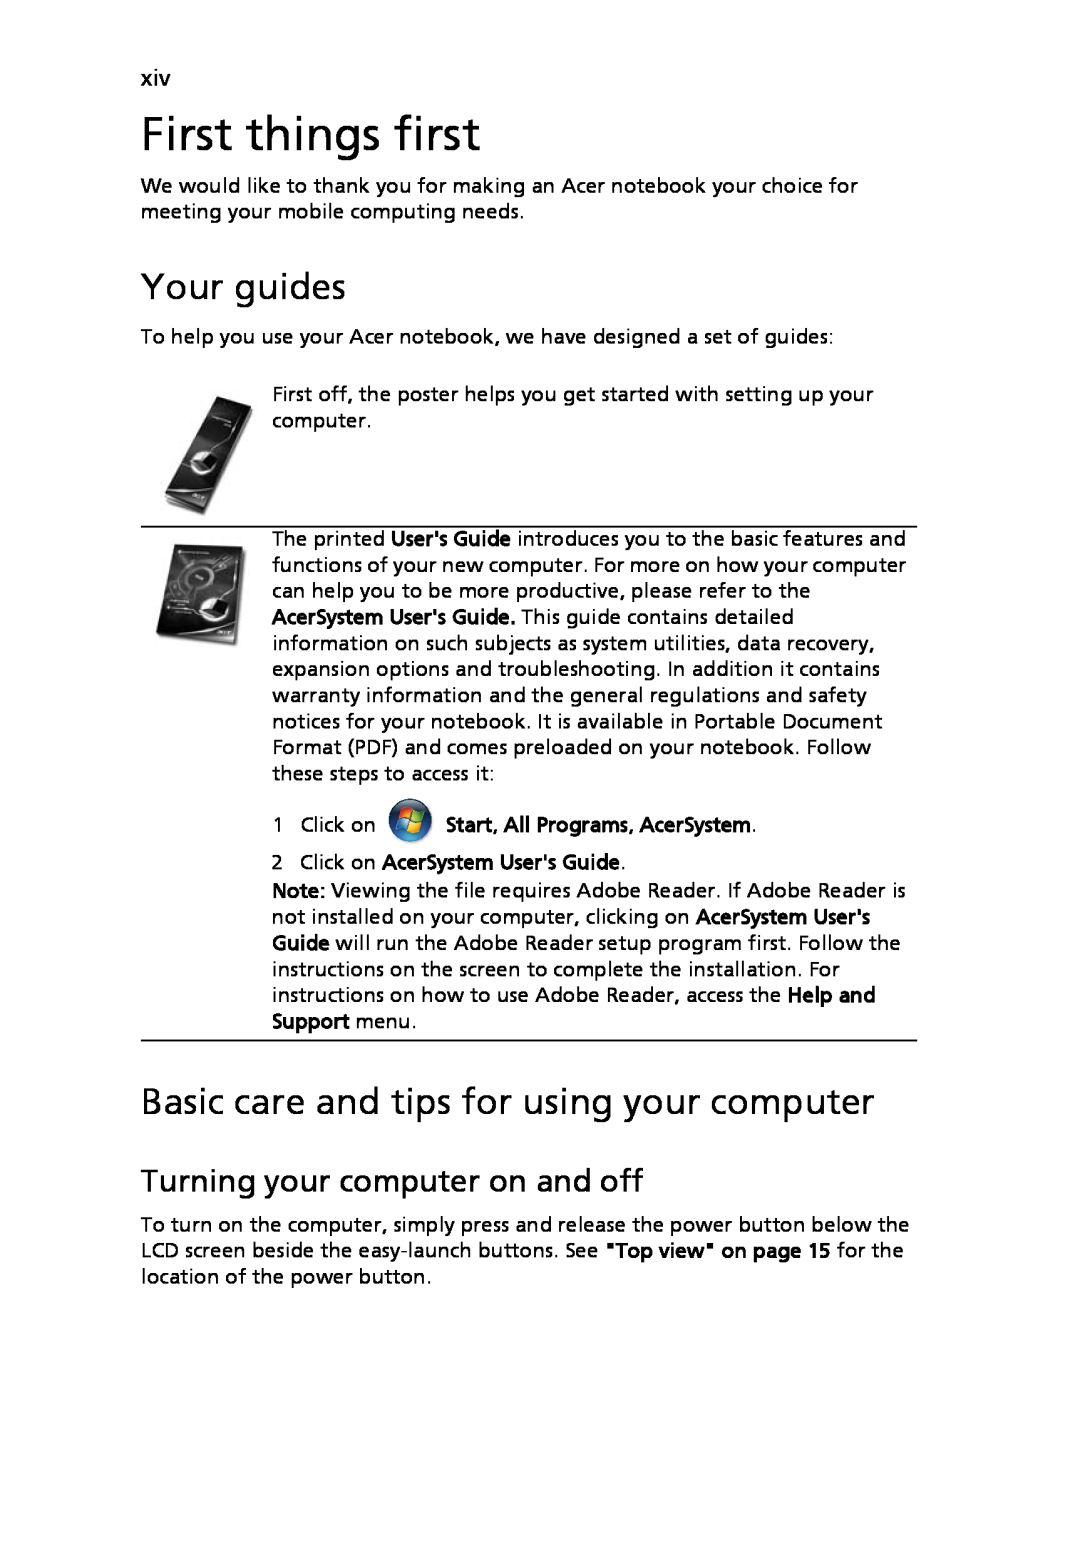 Acer 8920 Series, LE1 manual First things first, Your guides, Basic care and tips for using your computer 